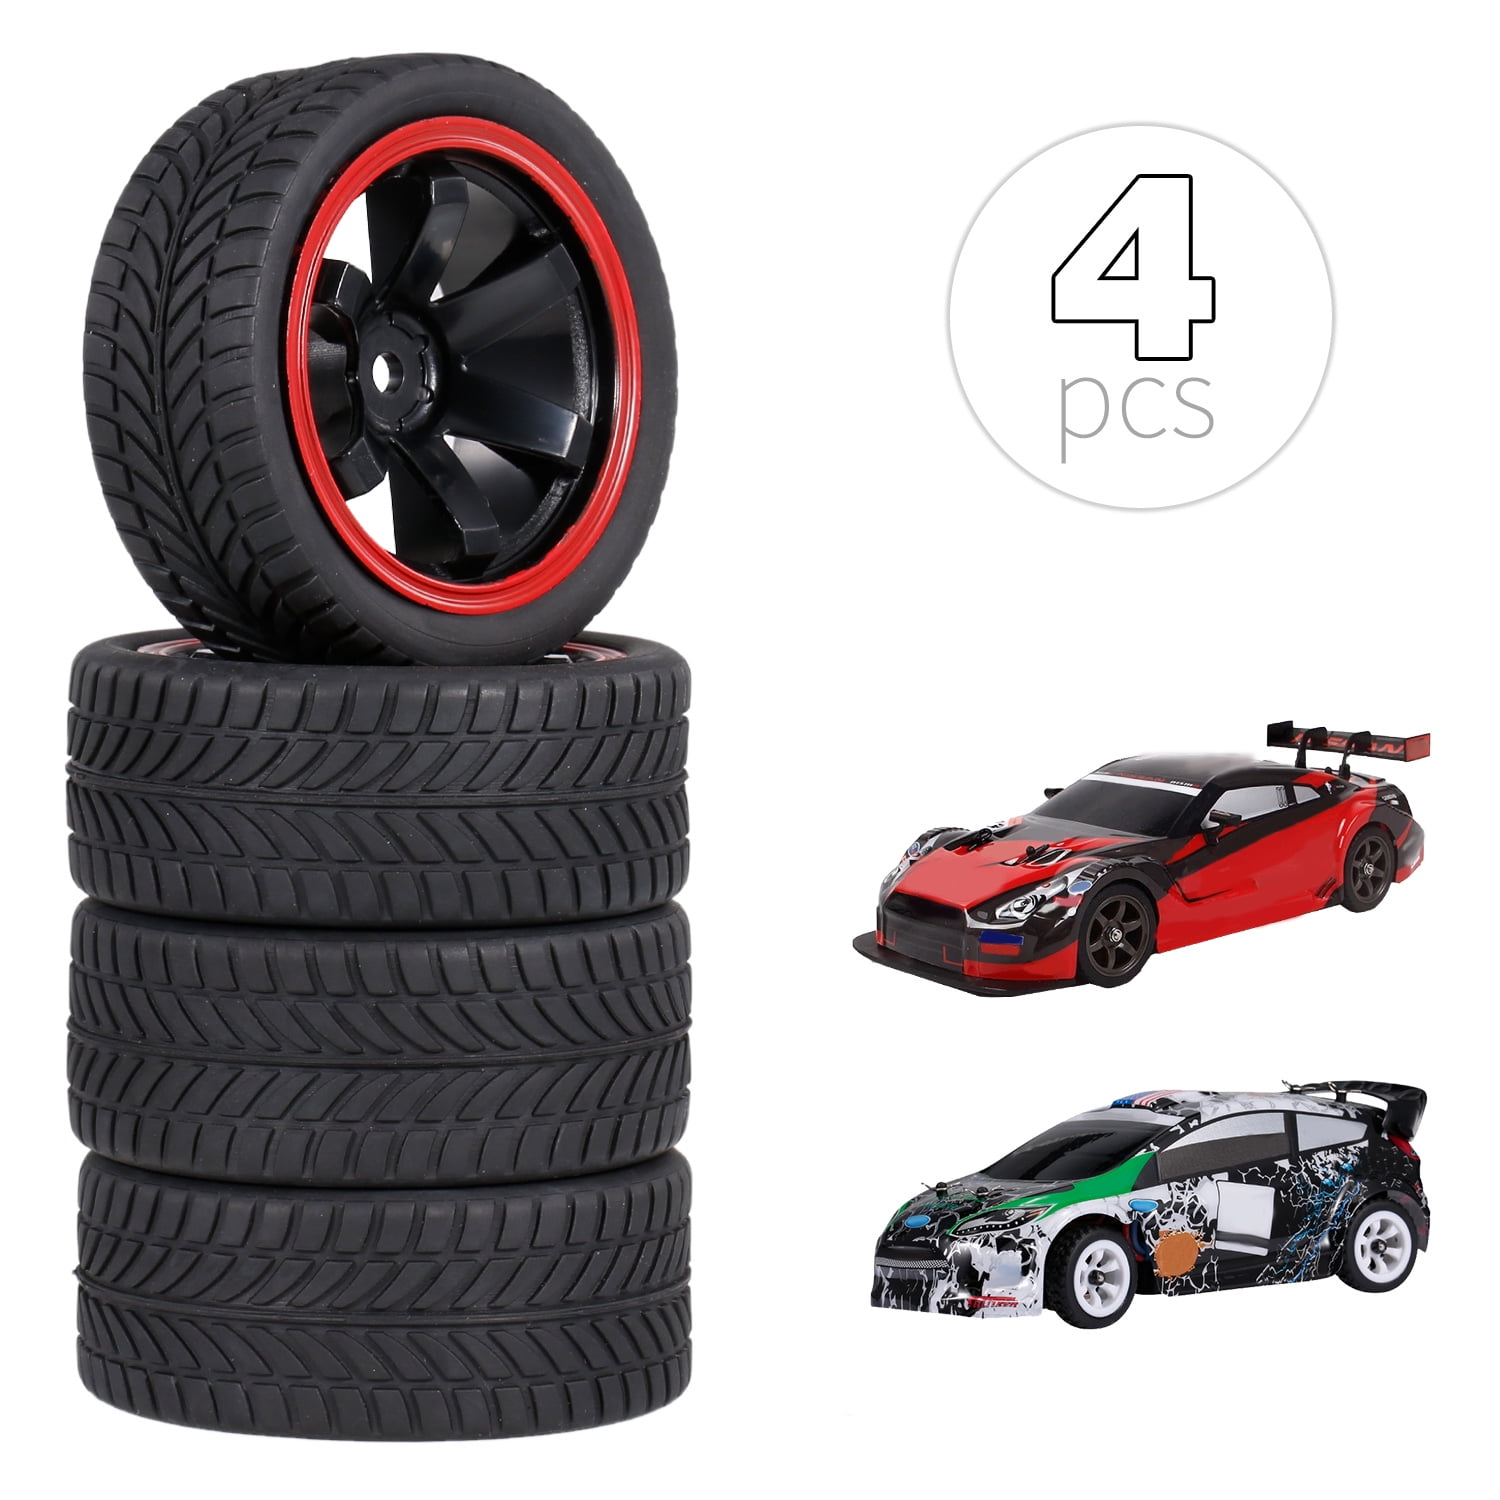 For HSP 1/10 On-Road Racing Car Rim02H-8006 Details about   RC Grip Rubber Tires & Wheel 4P